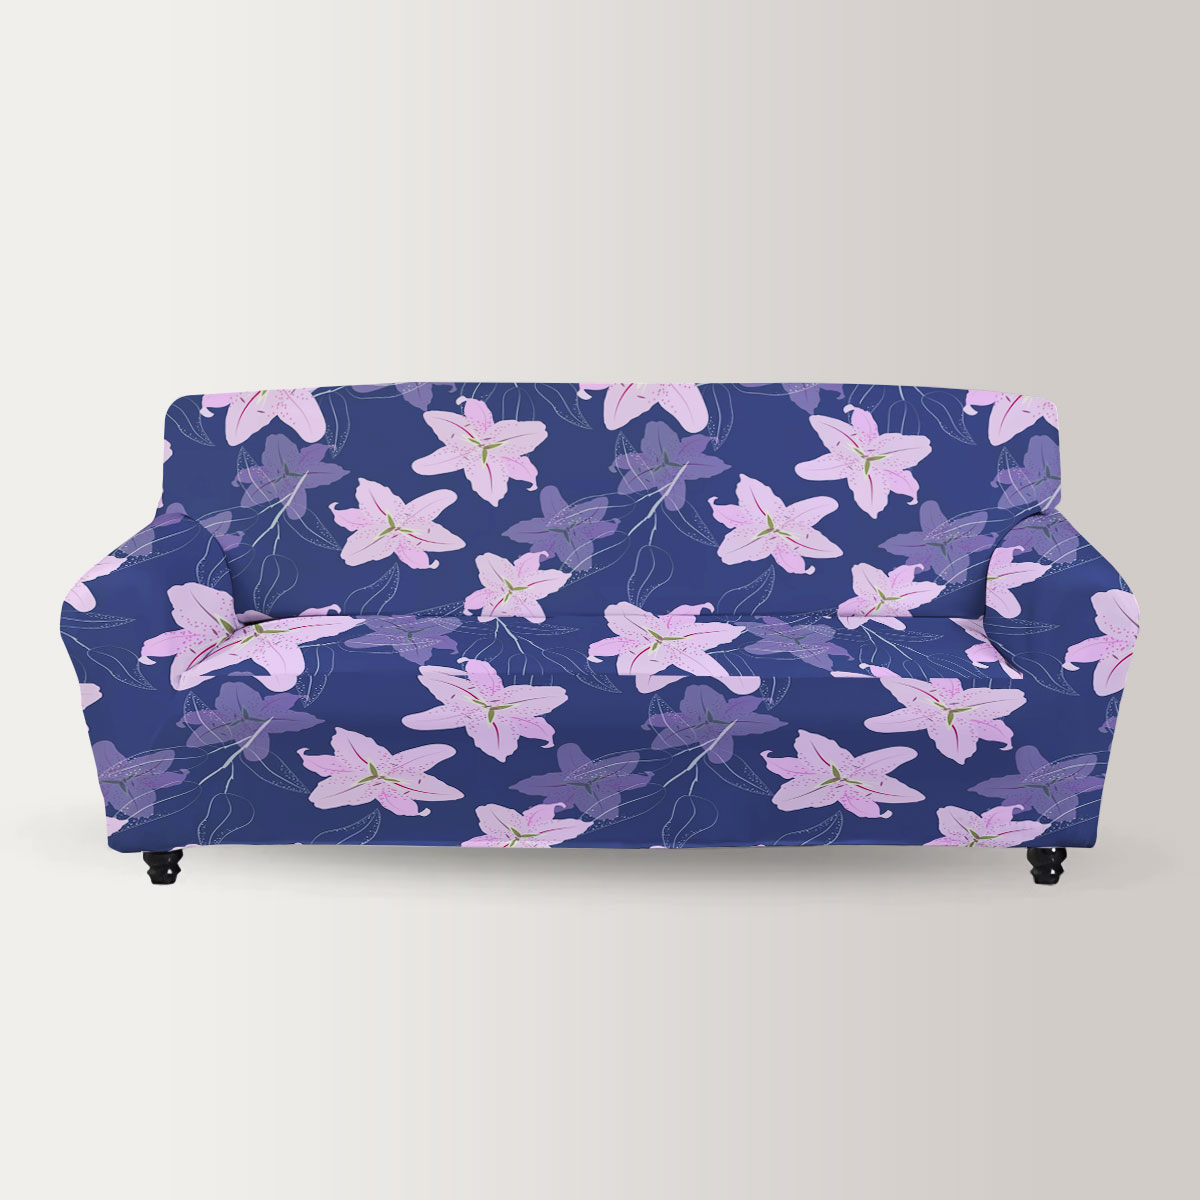 Purple Lily Flowers Sofa Cover